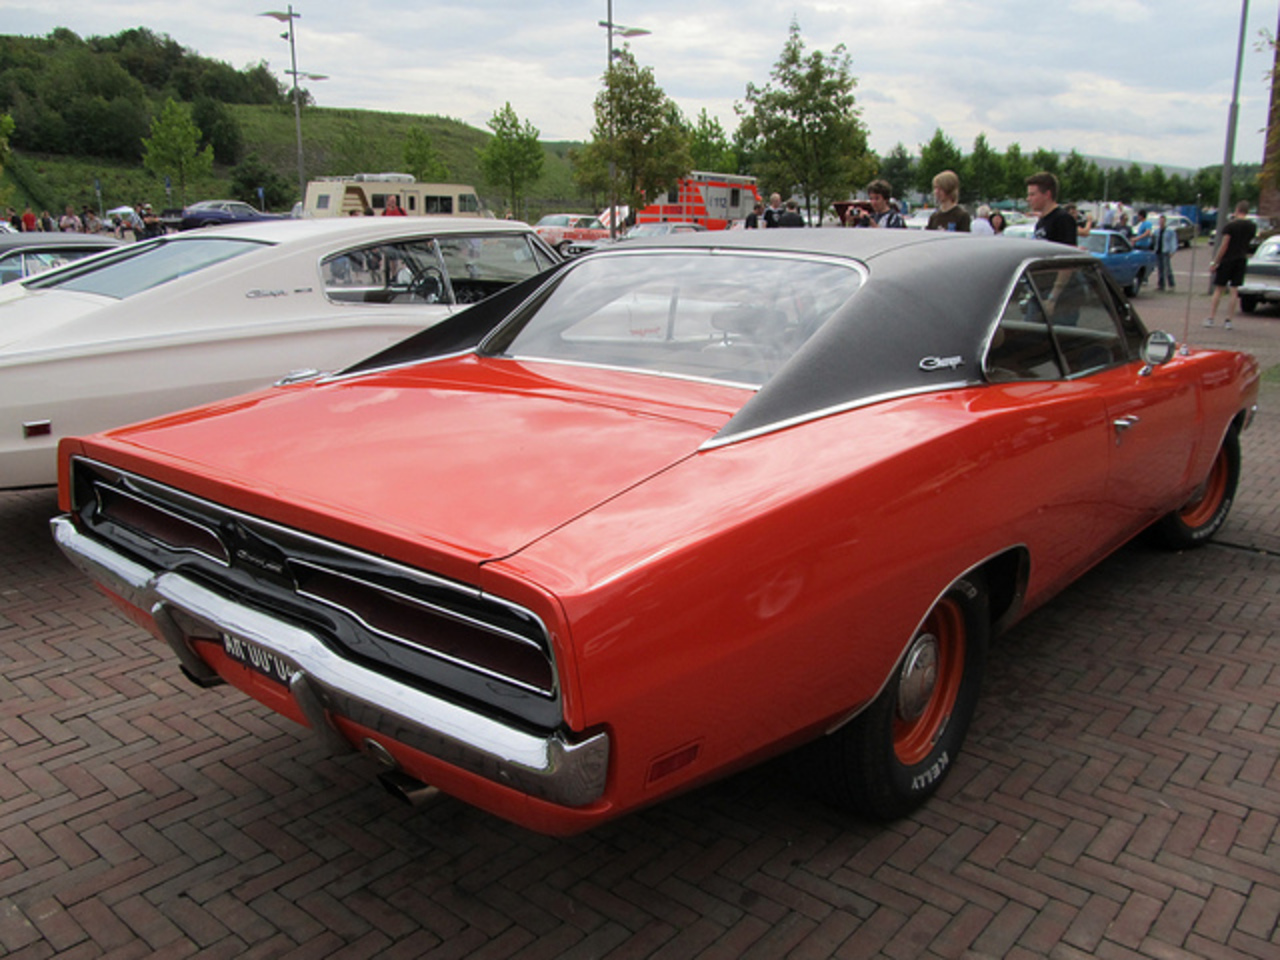 Dodge Charger 383 1969 | Flickr - Photo Sharing!